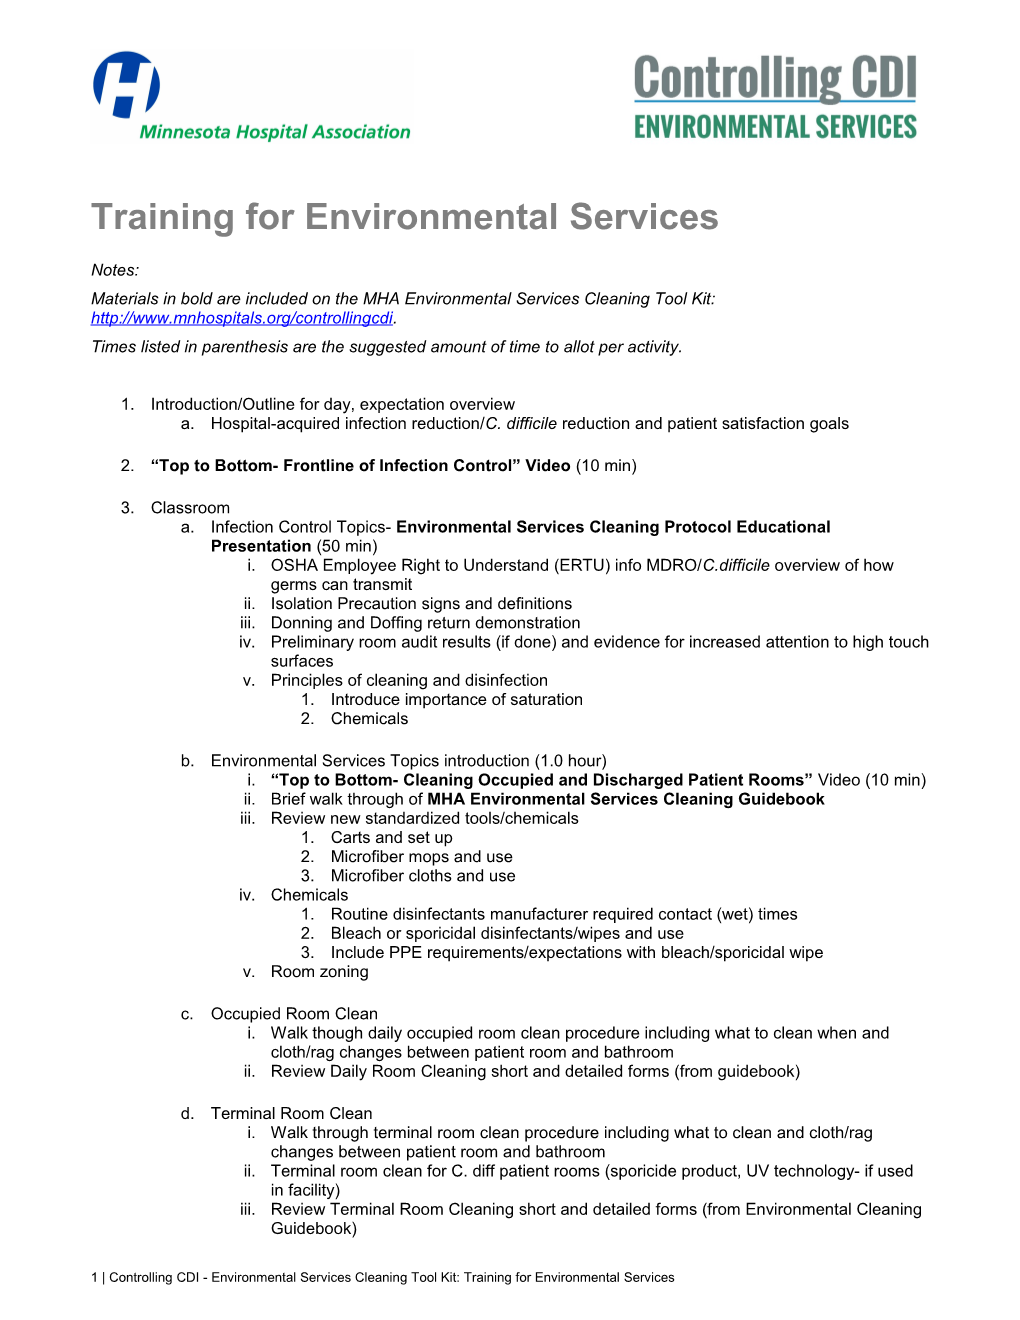 Training for Environmental Services Draft Outline